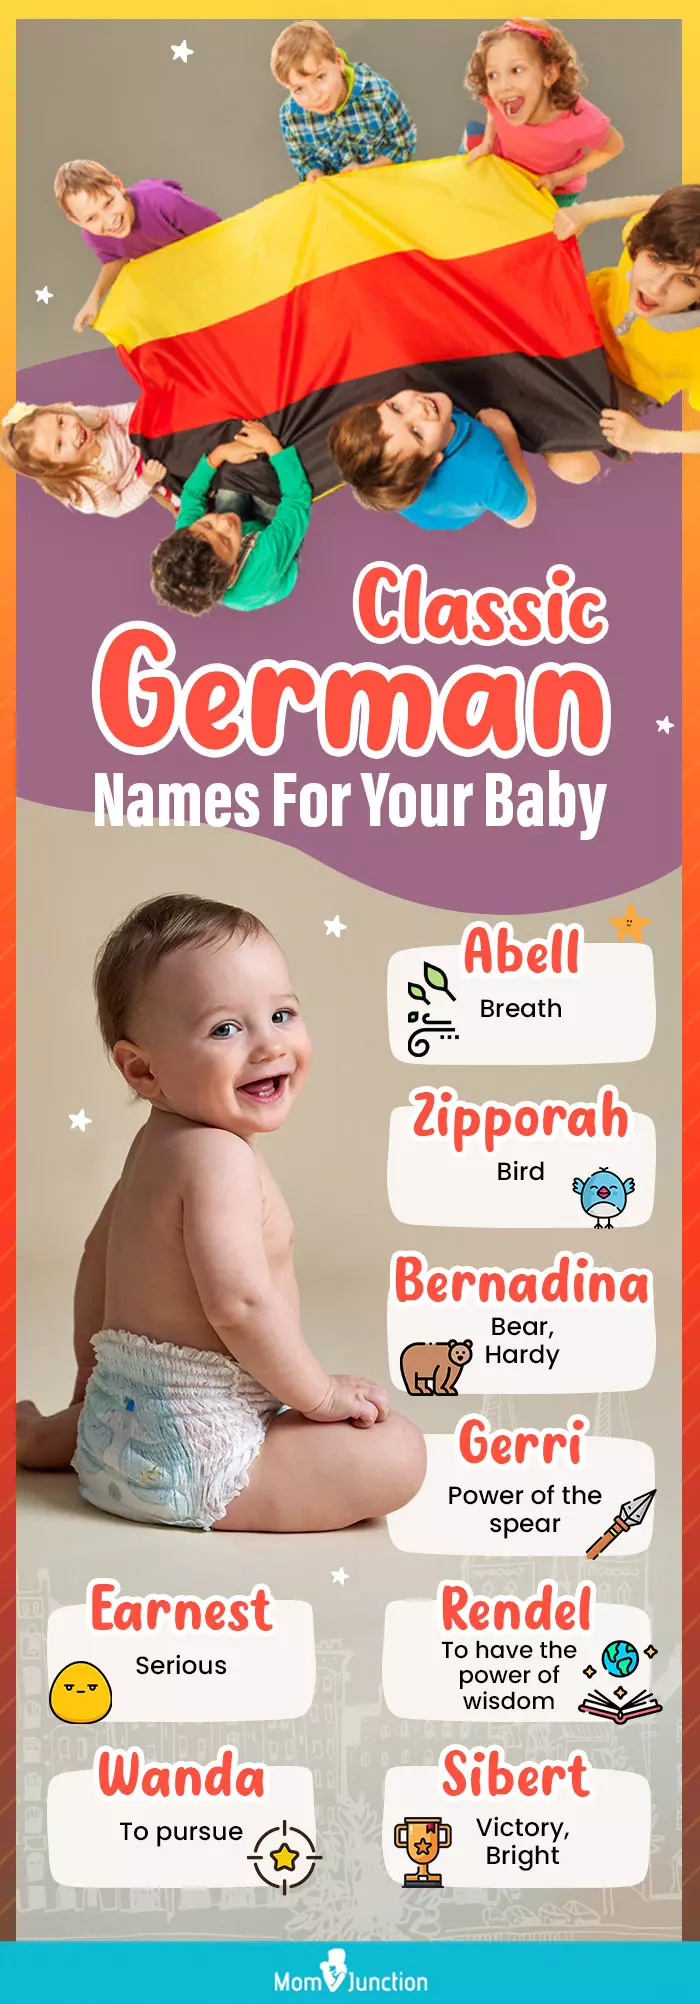 classic german names for your baby (infographic)